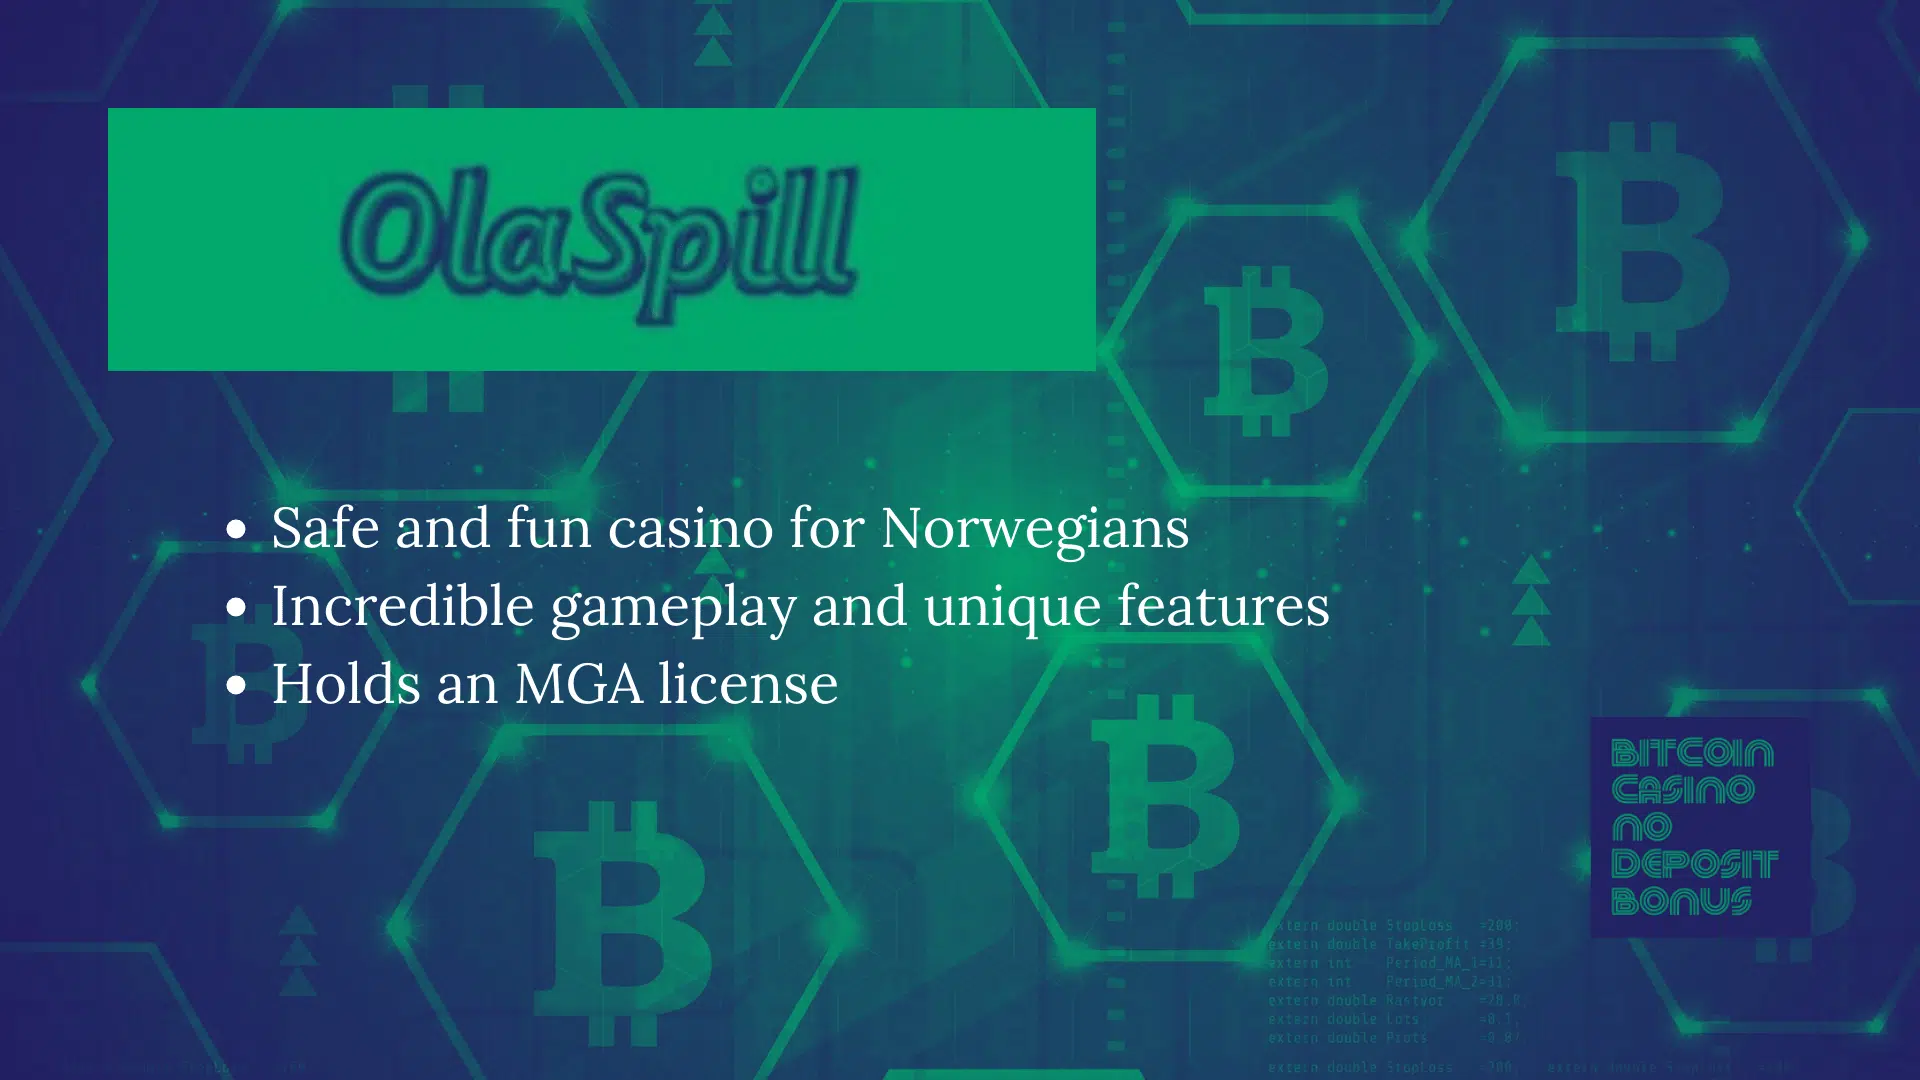 You are currently viewing OlaSpill Casino Promo Codes – OlaSpill.com Free Spins December 2022